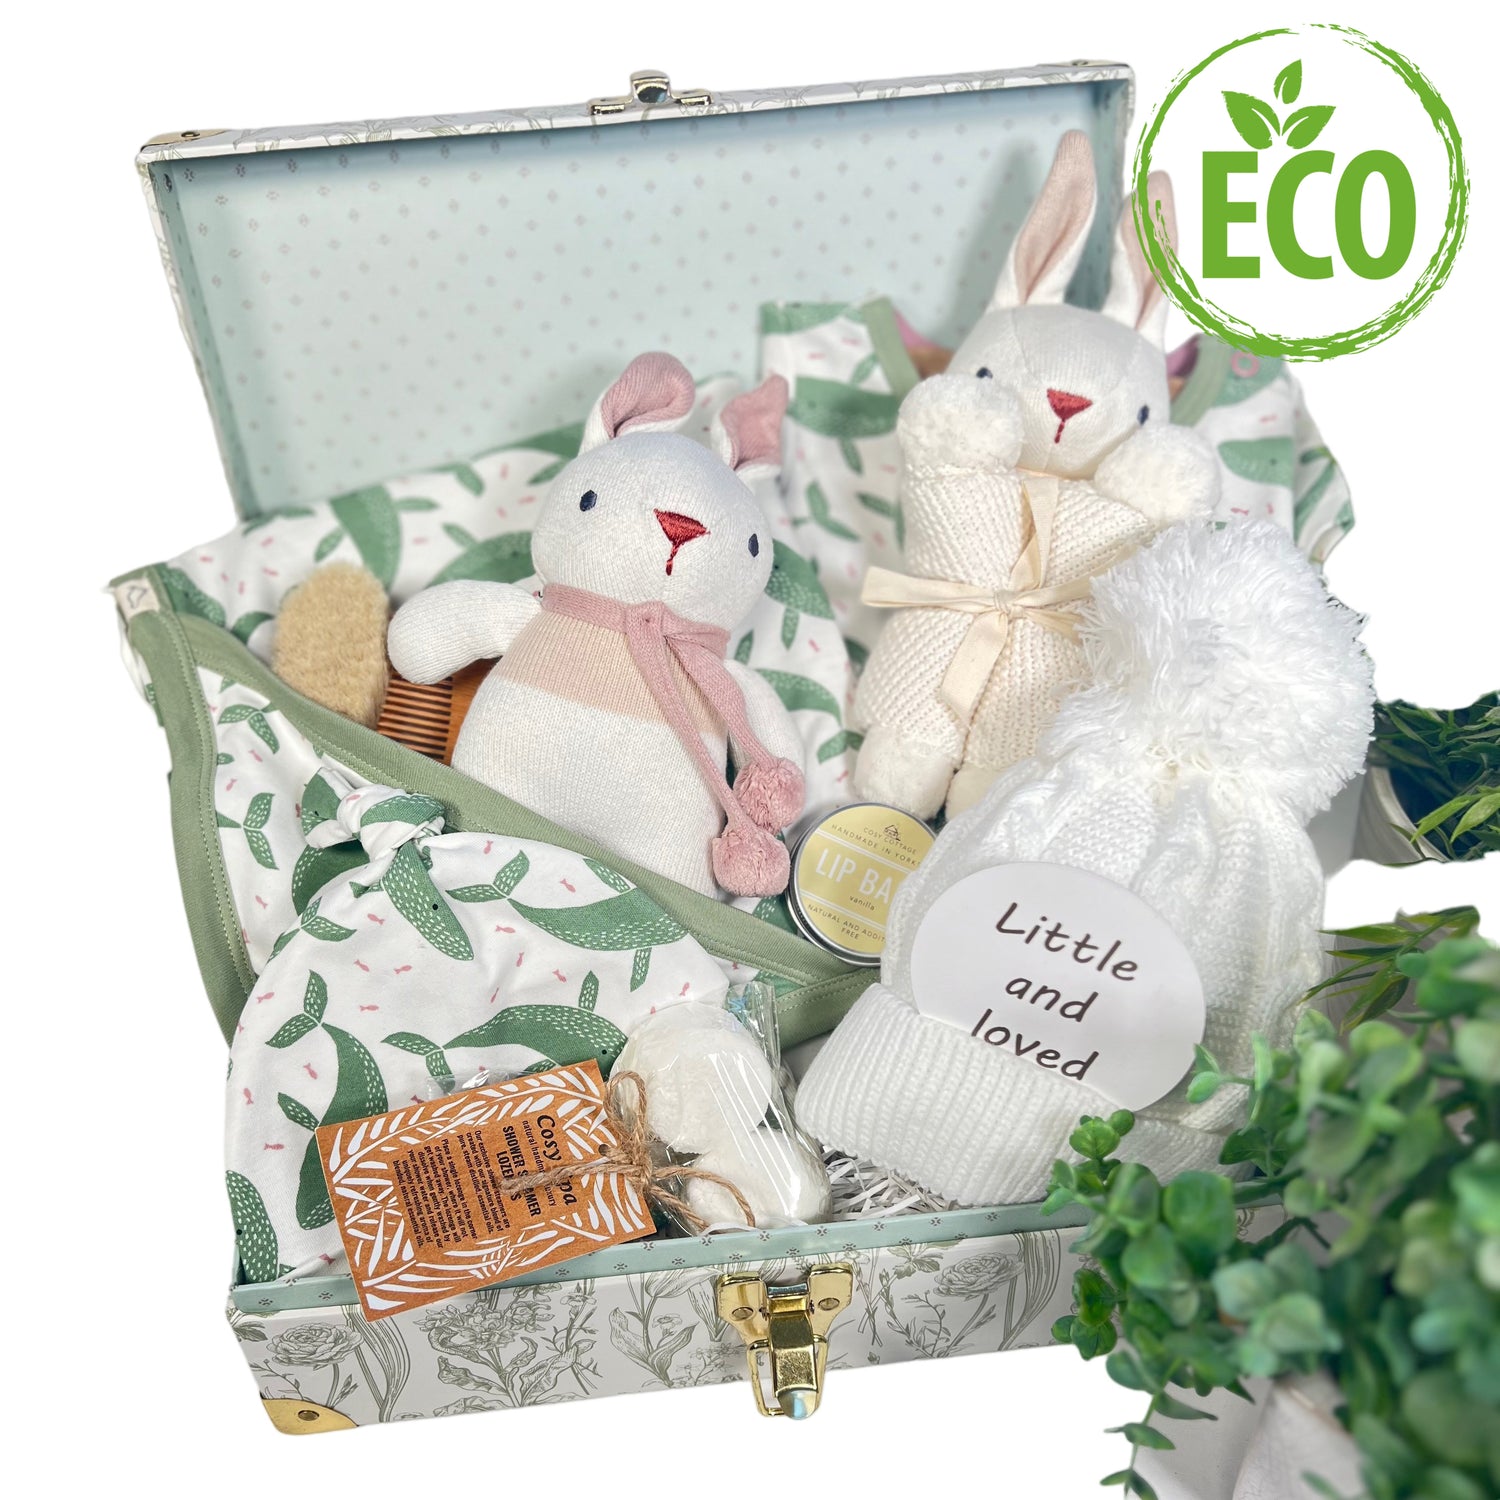 This new baby girl gift comes in a floral baby keepsake case which contains a GOTS certified organic baby blanket, baby body suit and matching baby knot hat, a baby pompom hat and Organic soft baby toys and natural toiletries for the new mummy.